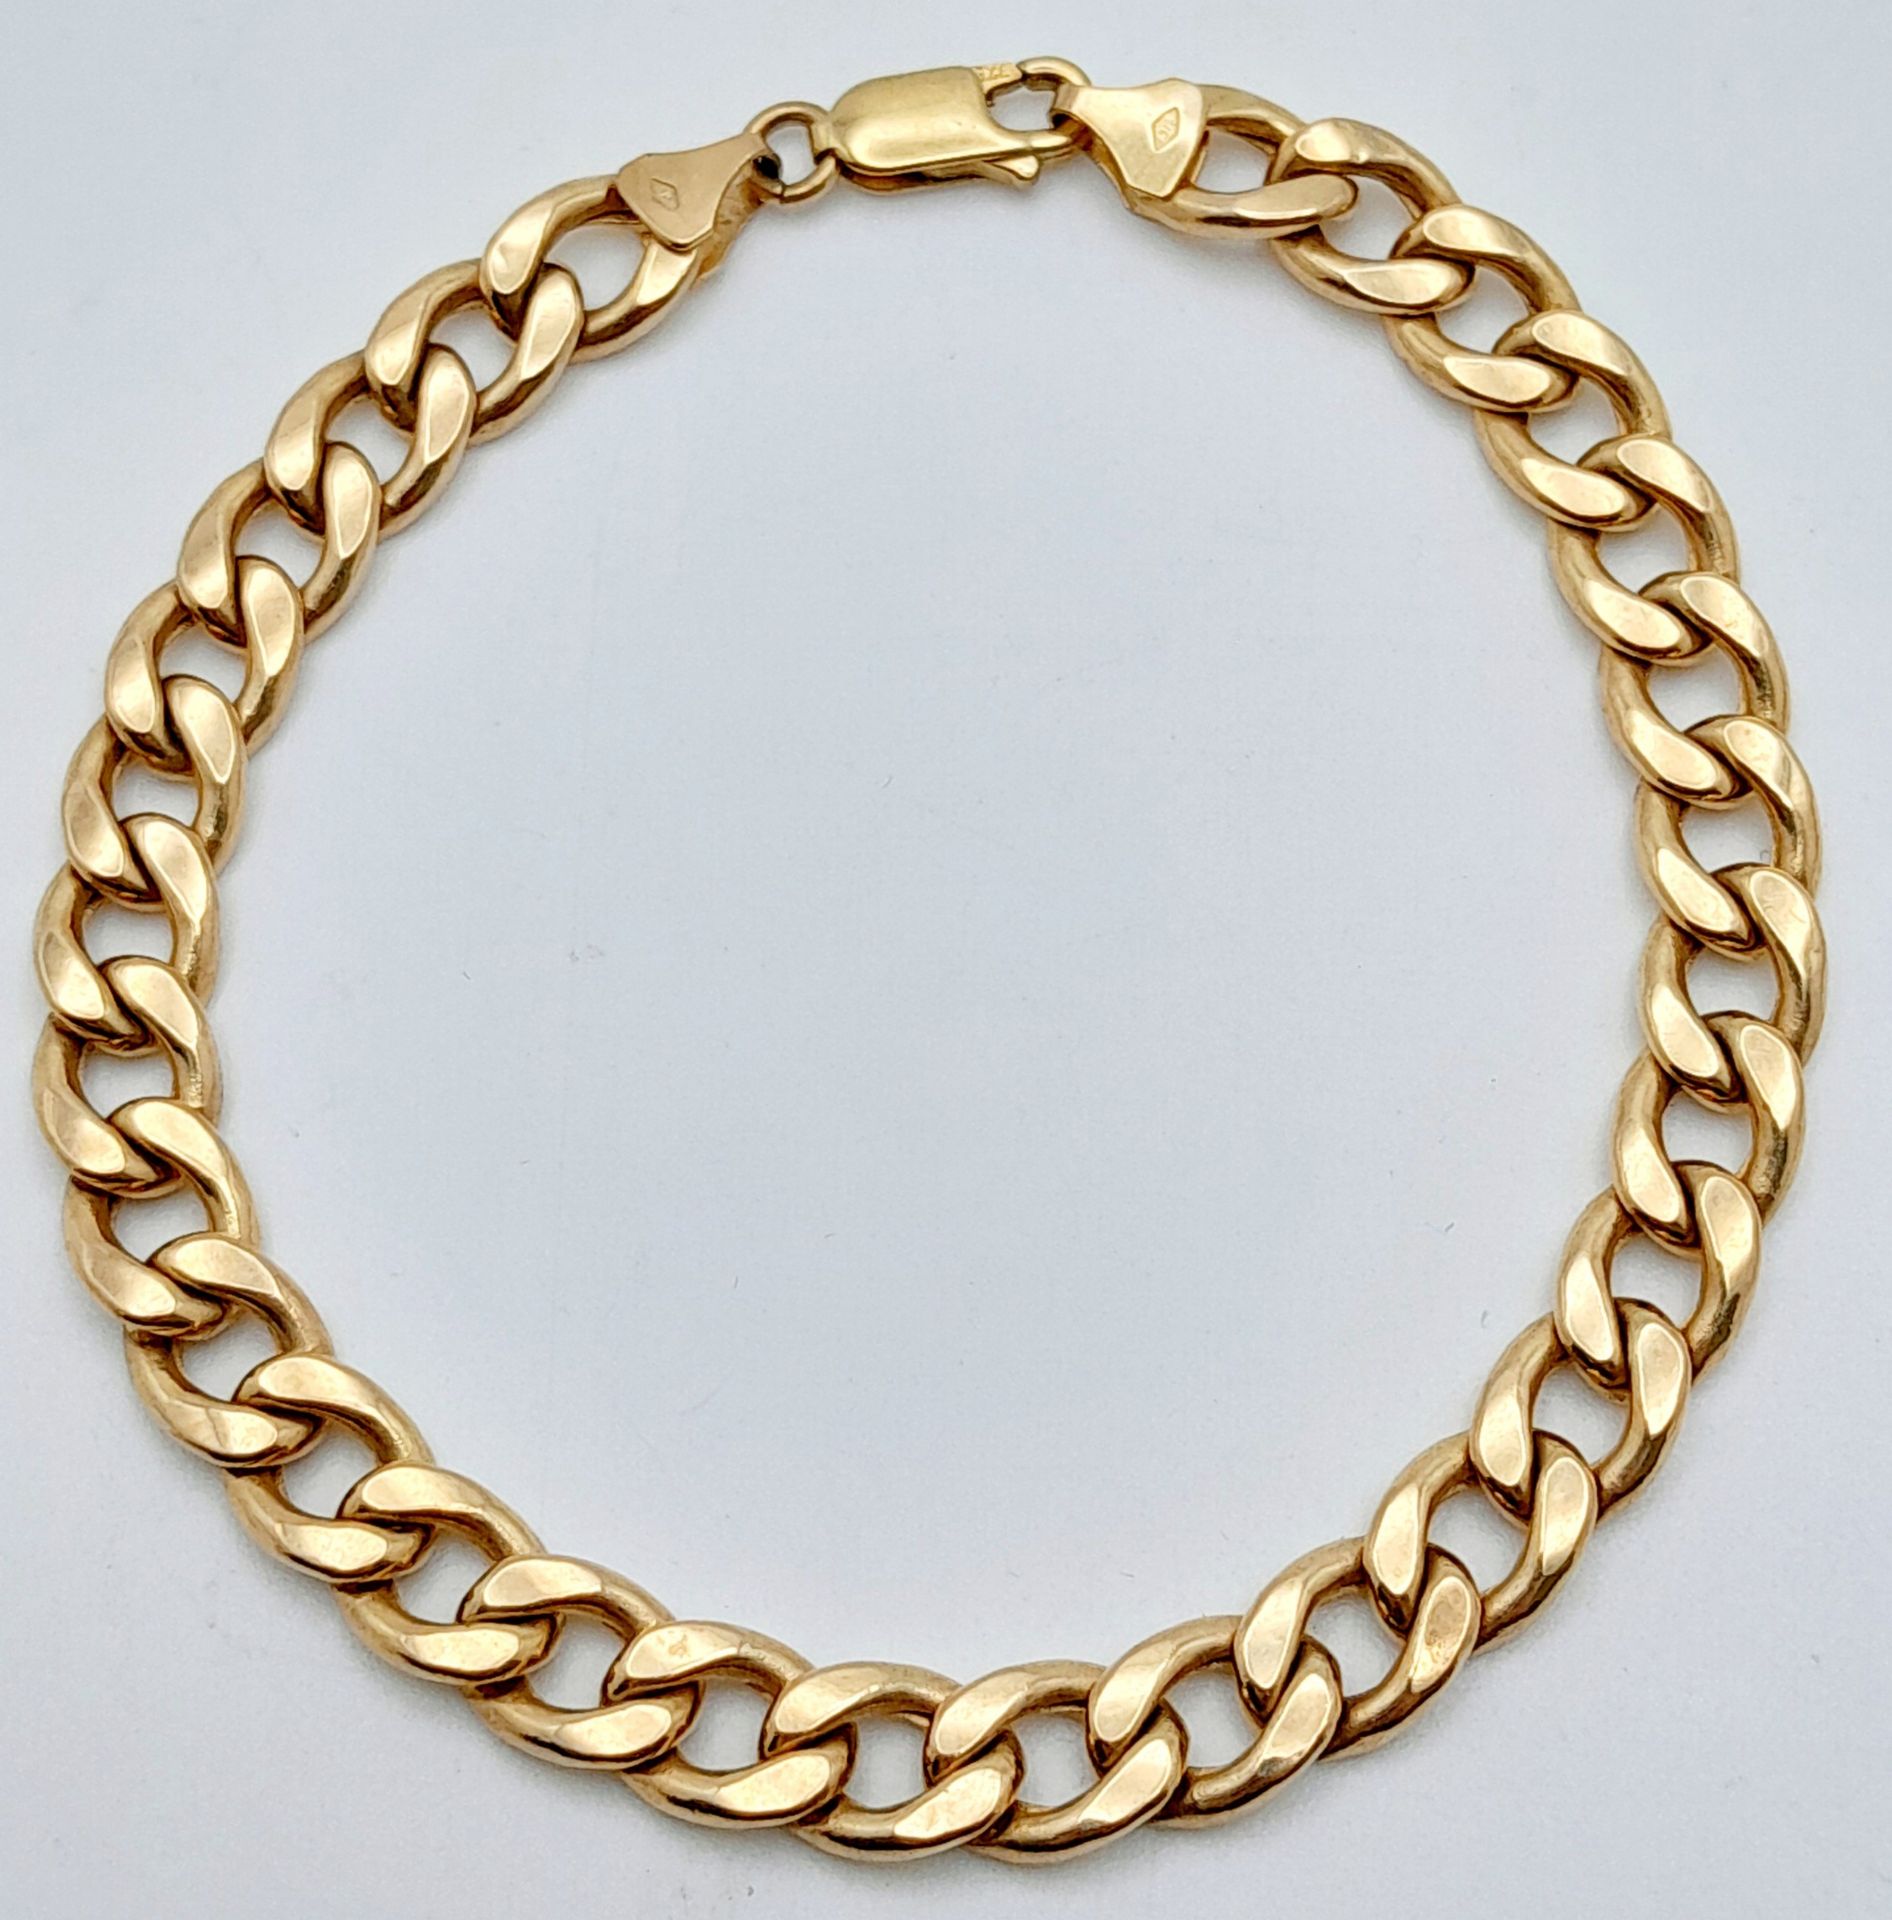 A 9K Yellow Gold Flat Curb Link Bracelet. 19cm. 6.1g weight. - Image 2 of 5